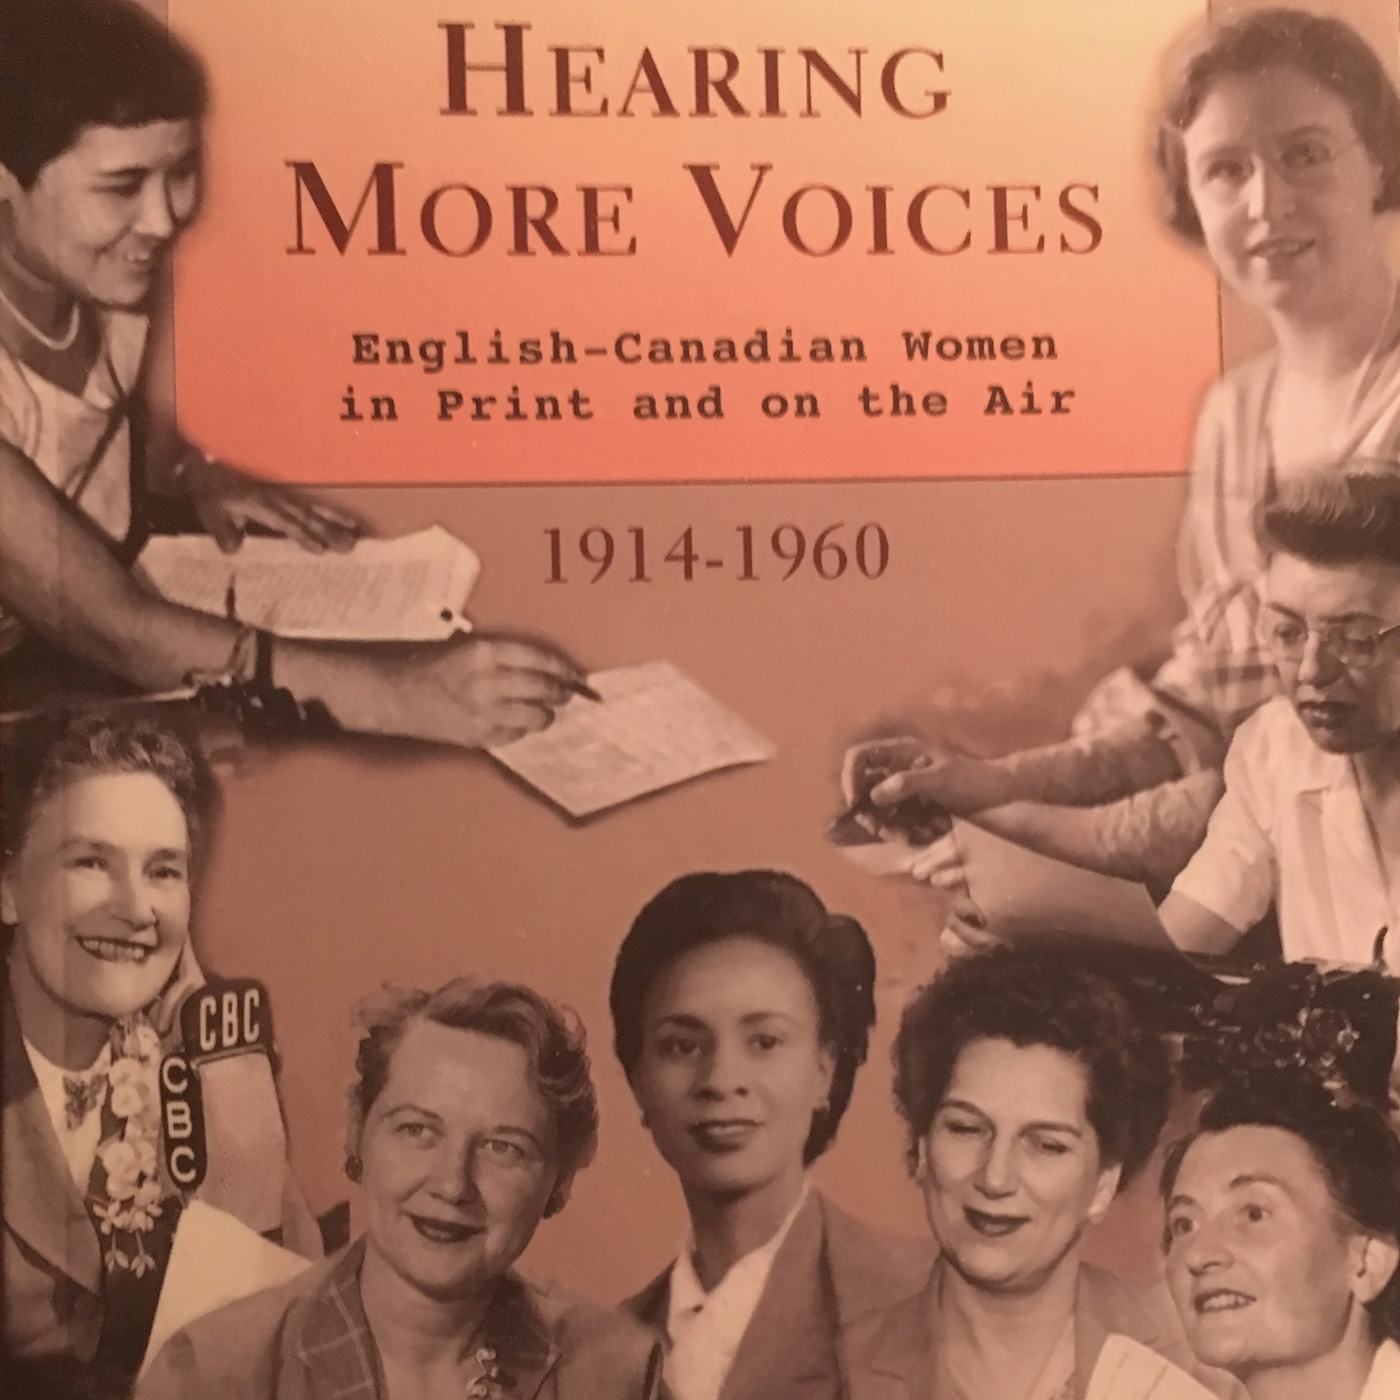 Peggy Kelly & Carole Gerson on reclaiming women's history in early Canadian broadcasting and publishing